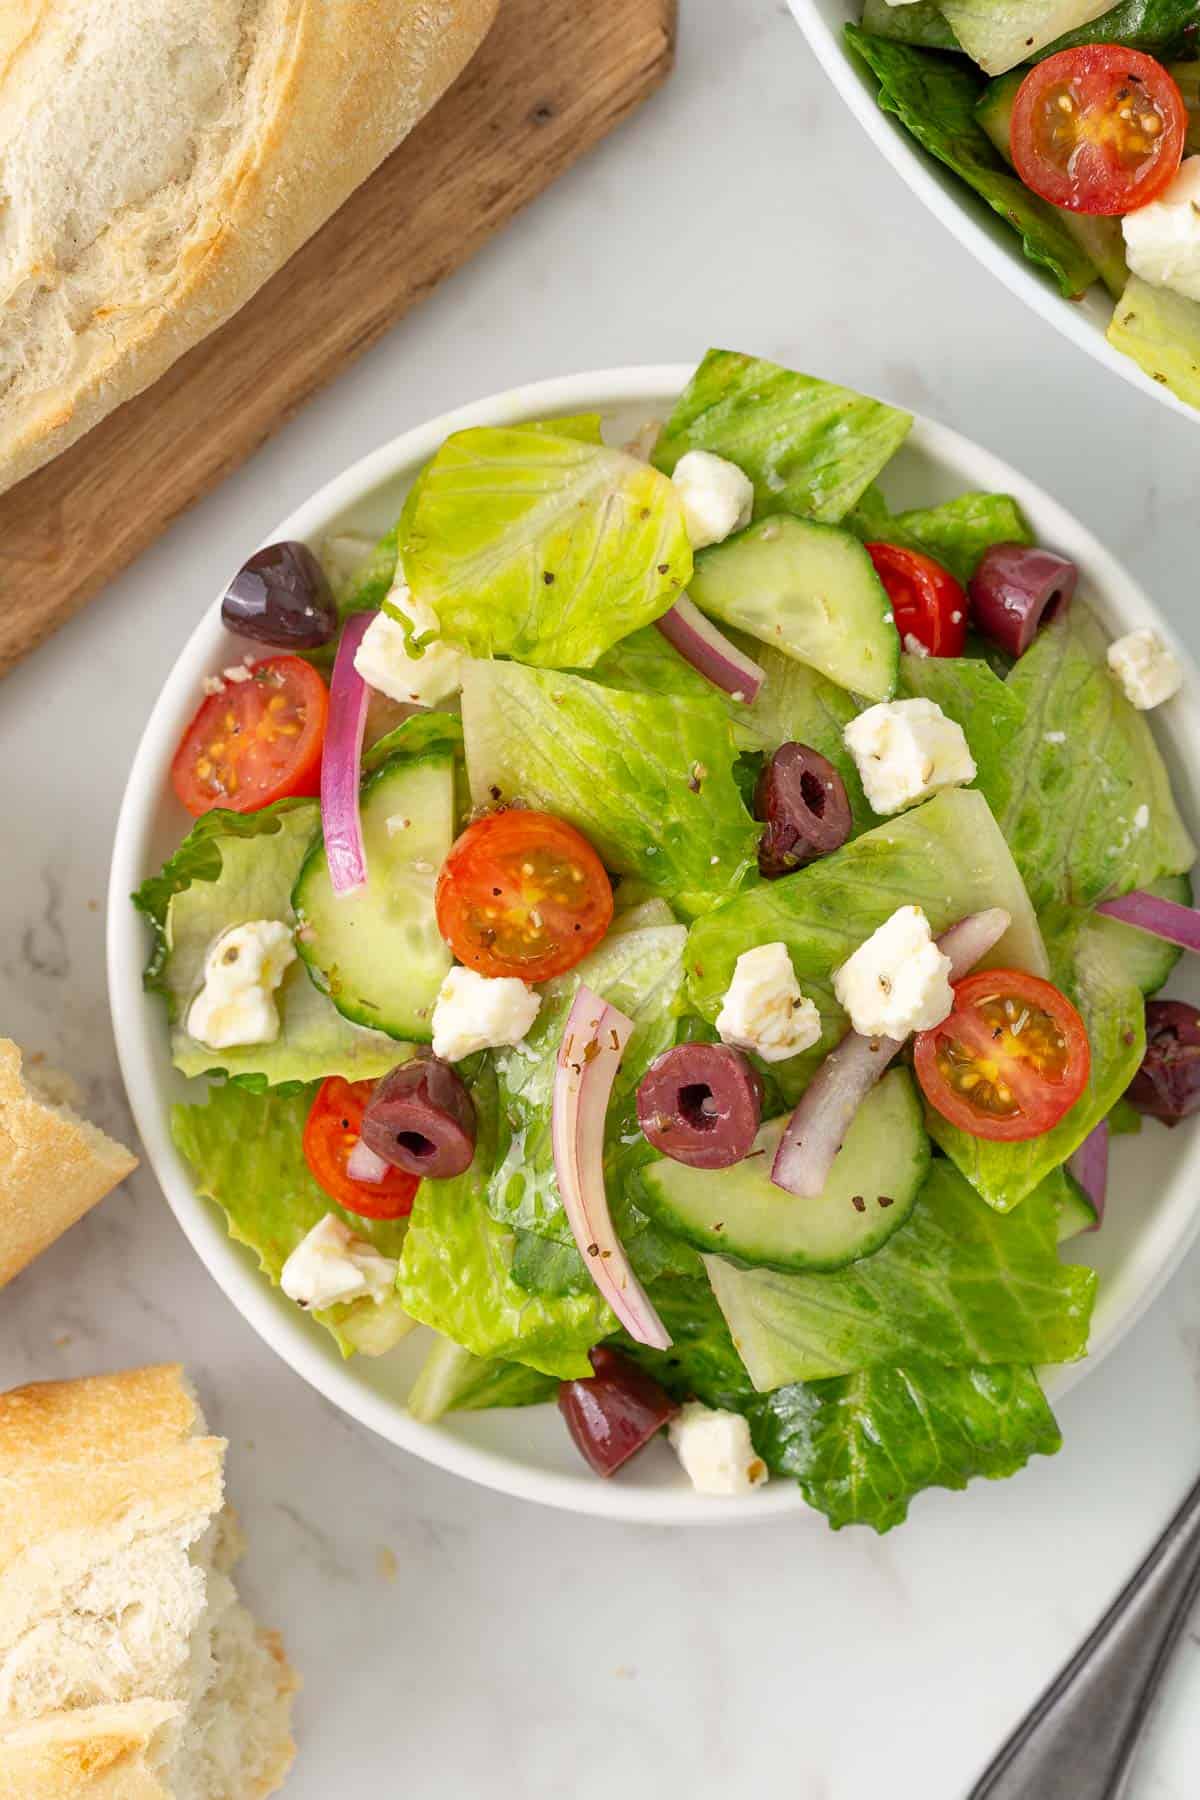 A bowl of Mediterranean salad beside a French baguette.